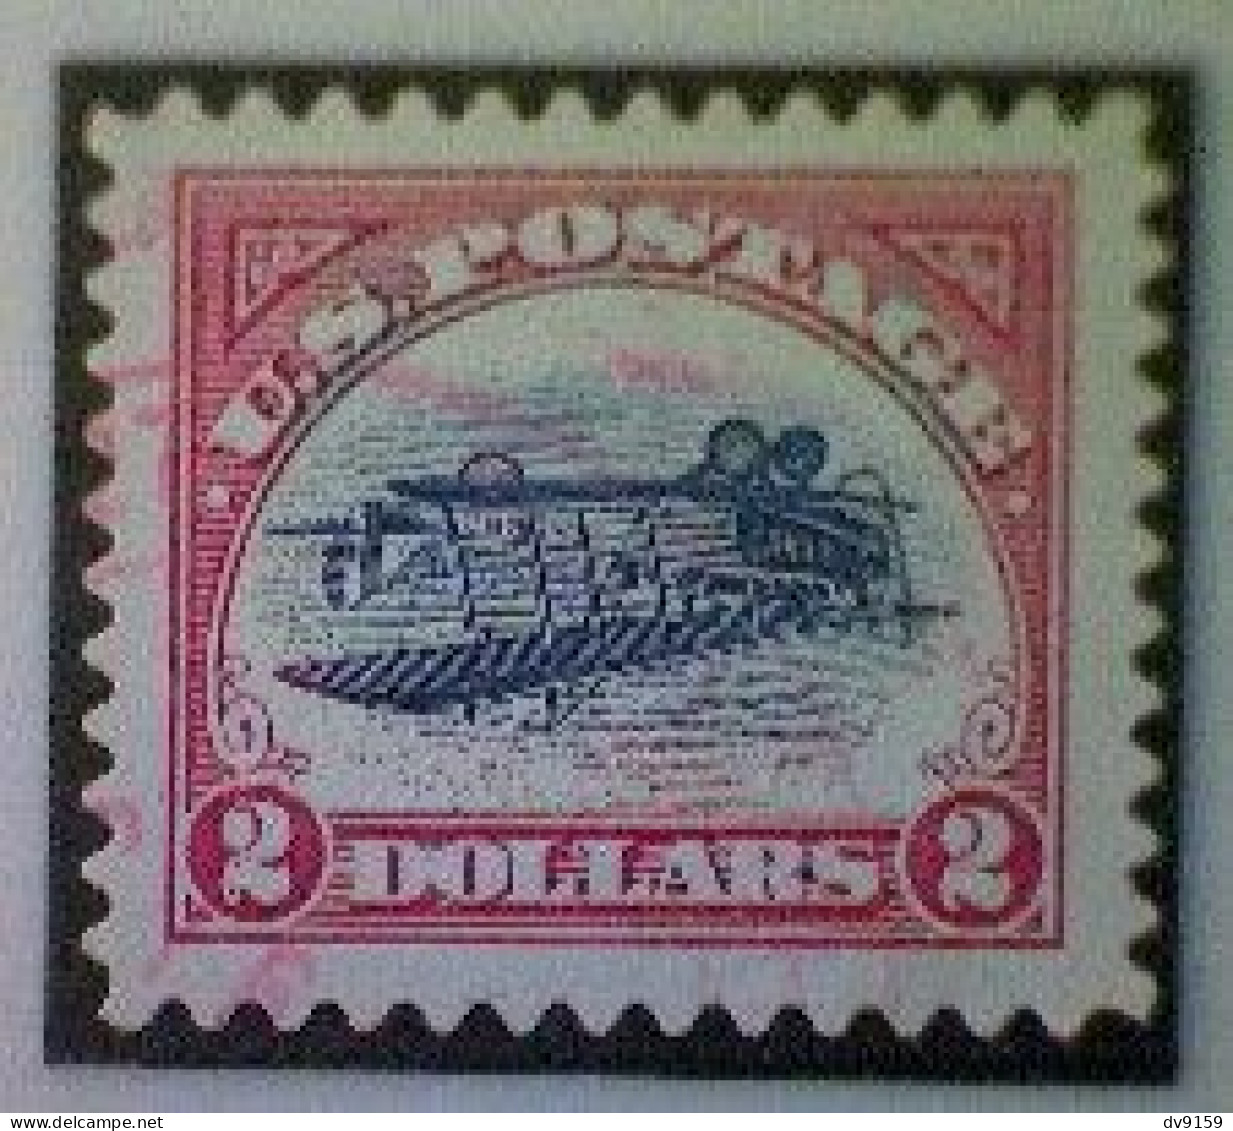 United States, Scott #4806a, Used(o), 2013, Inverted Jenny, Single, $2, Blue, Black, And Red - Usati